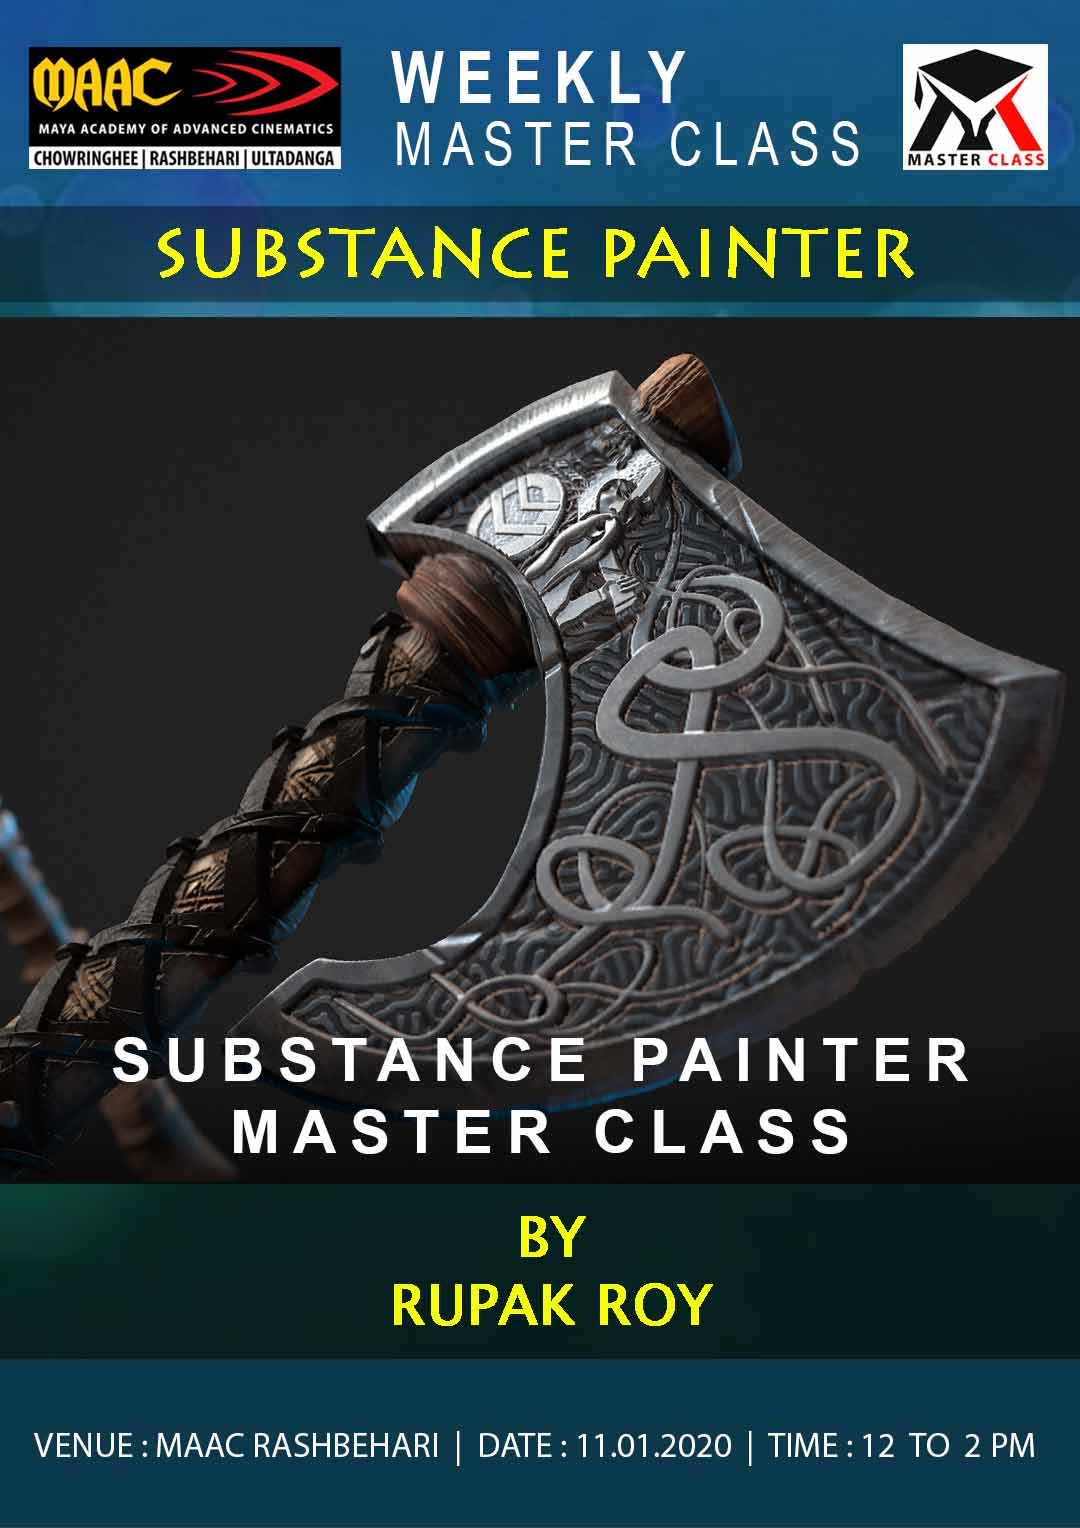 Weekly Master Class on Substance Painter